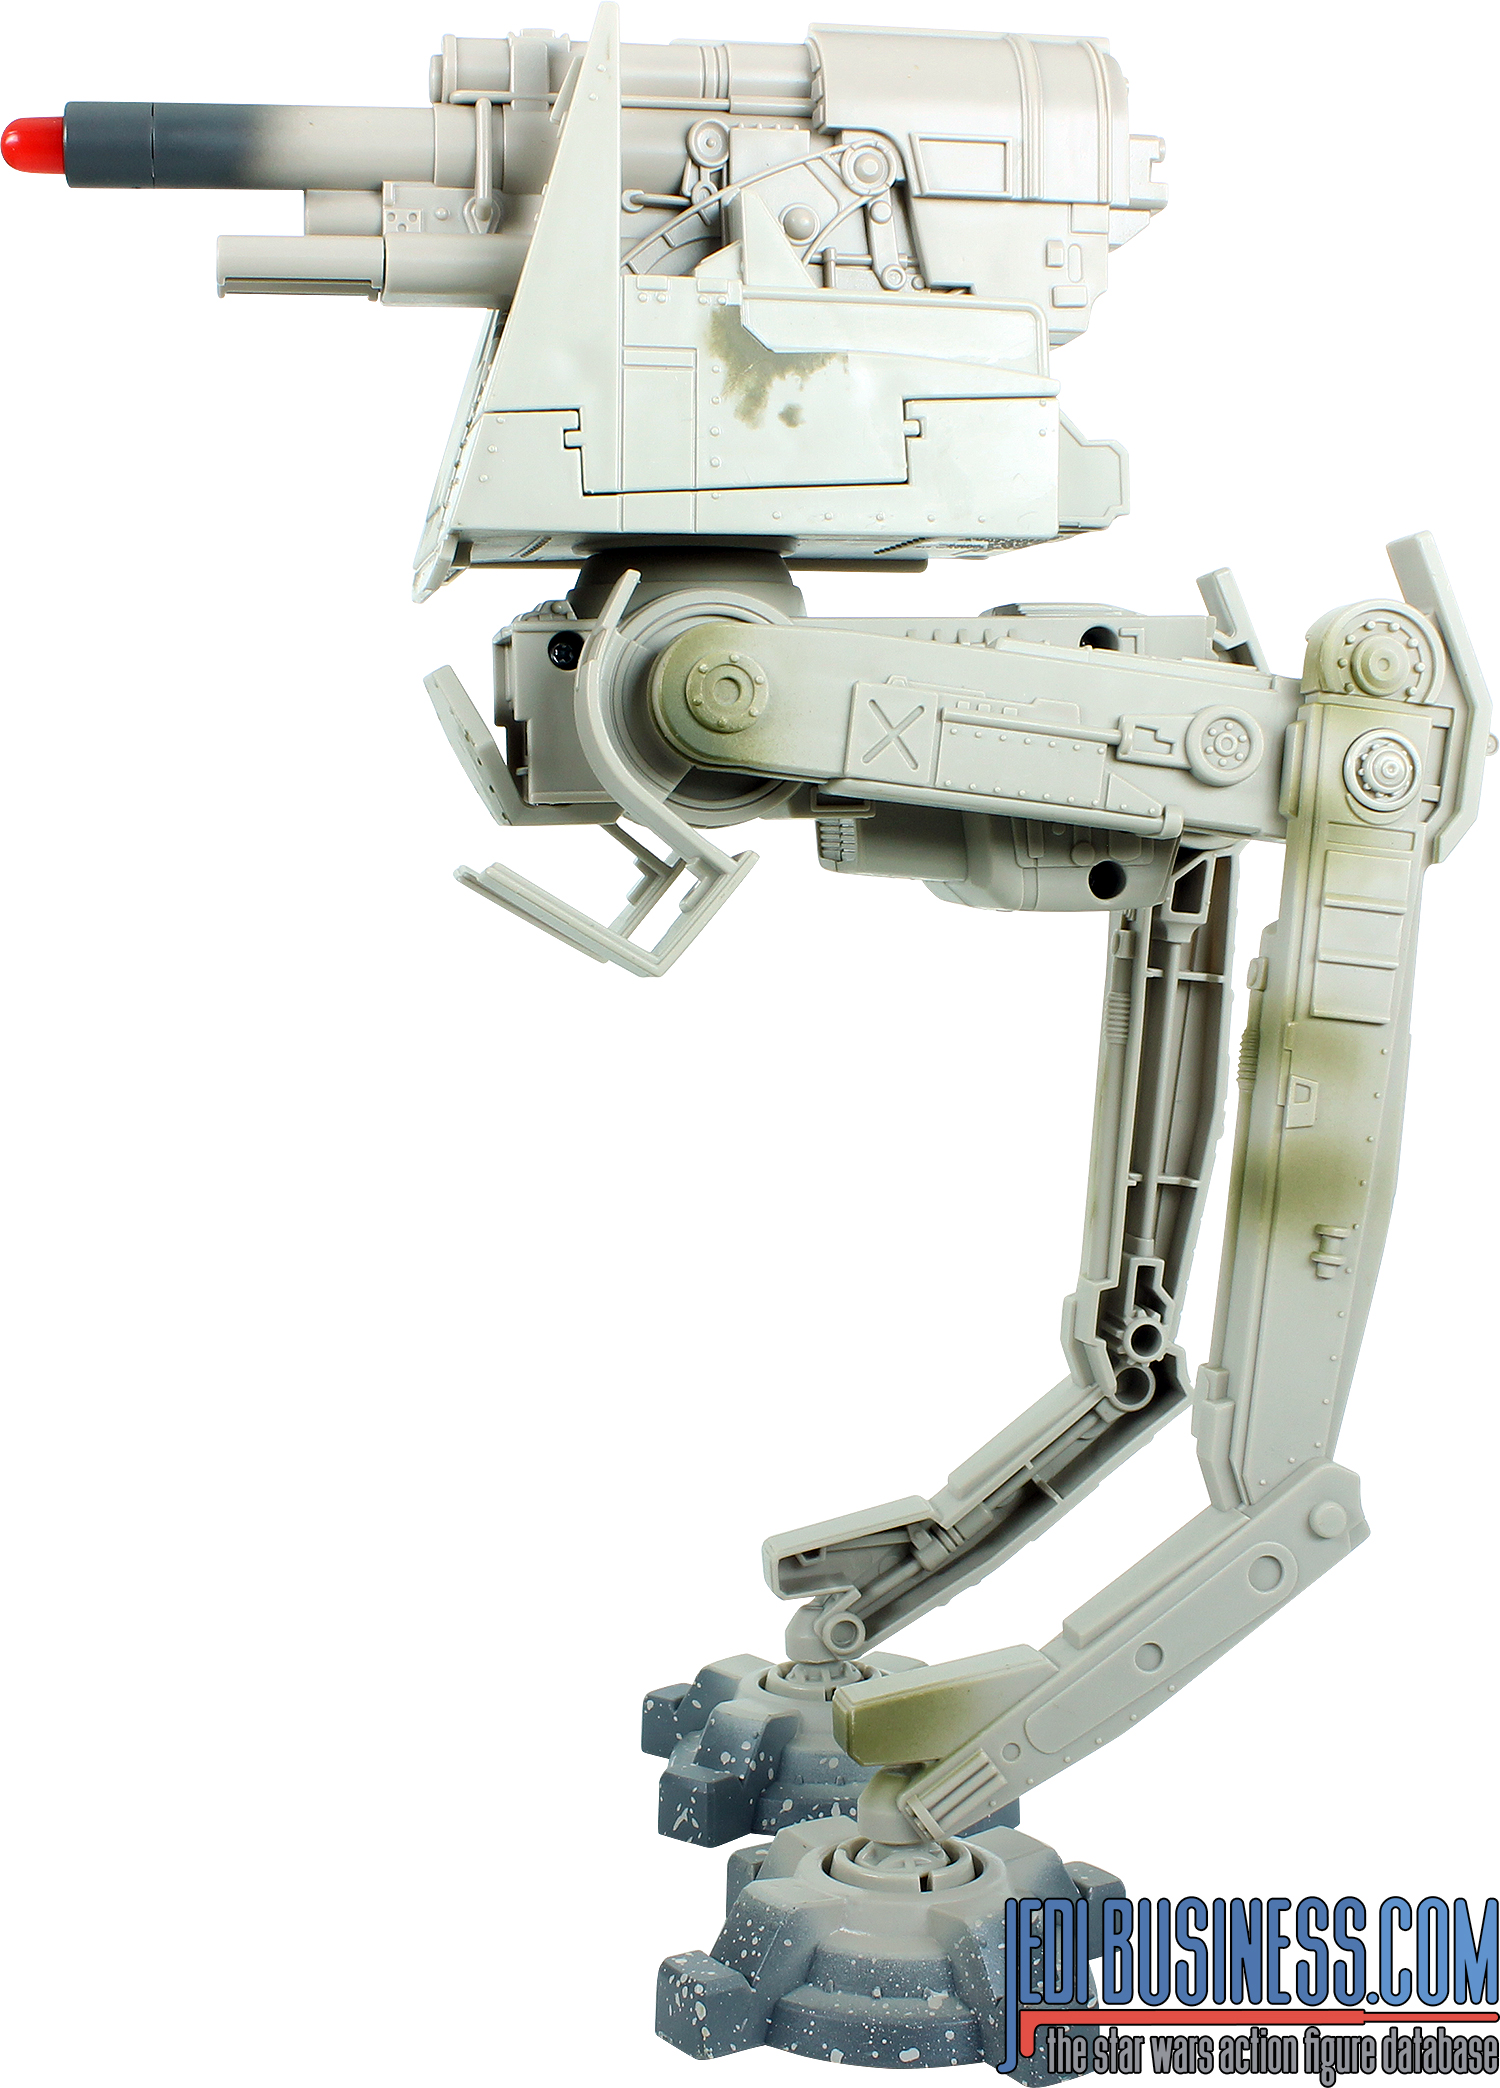 Stormtrooper With Imperial AT-DT Walker